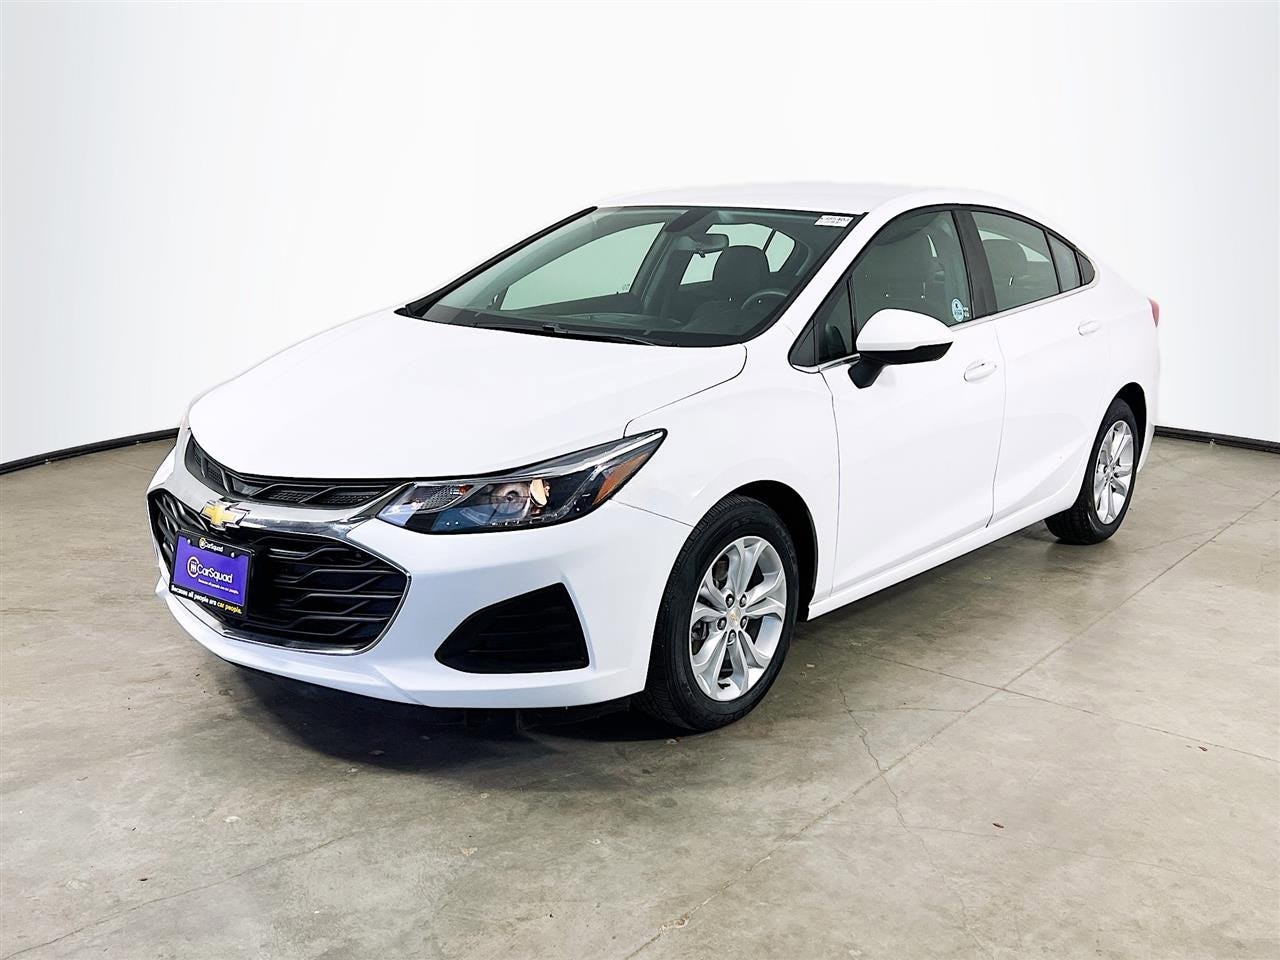 Used 2019 Chevrolet Cruze For Sale at CarSquad | VIN: 1G1BE5SM5K7118099